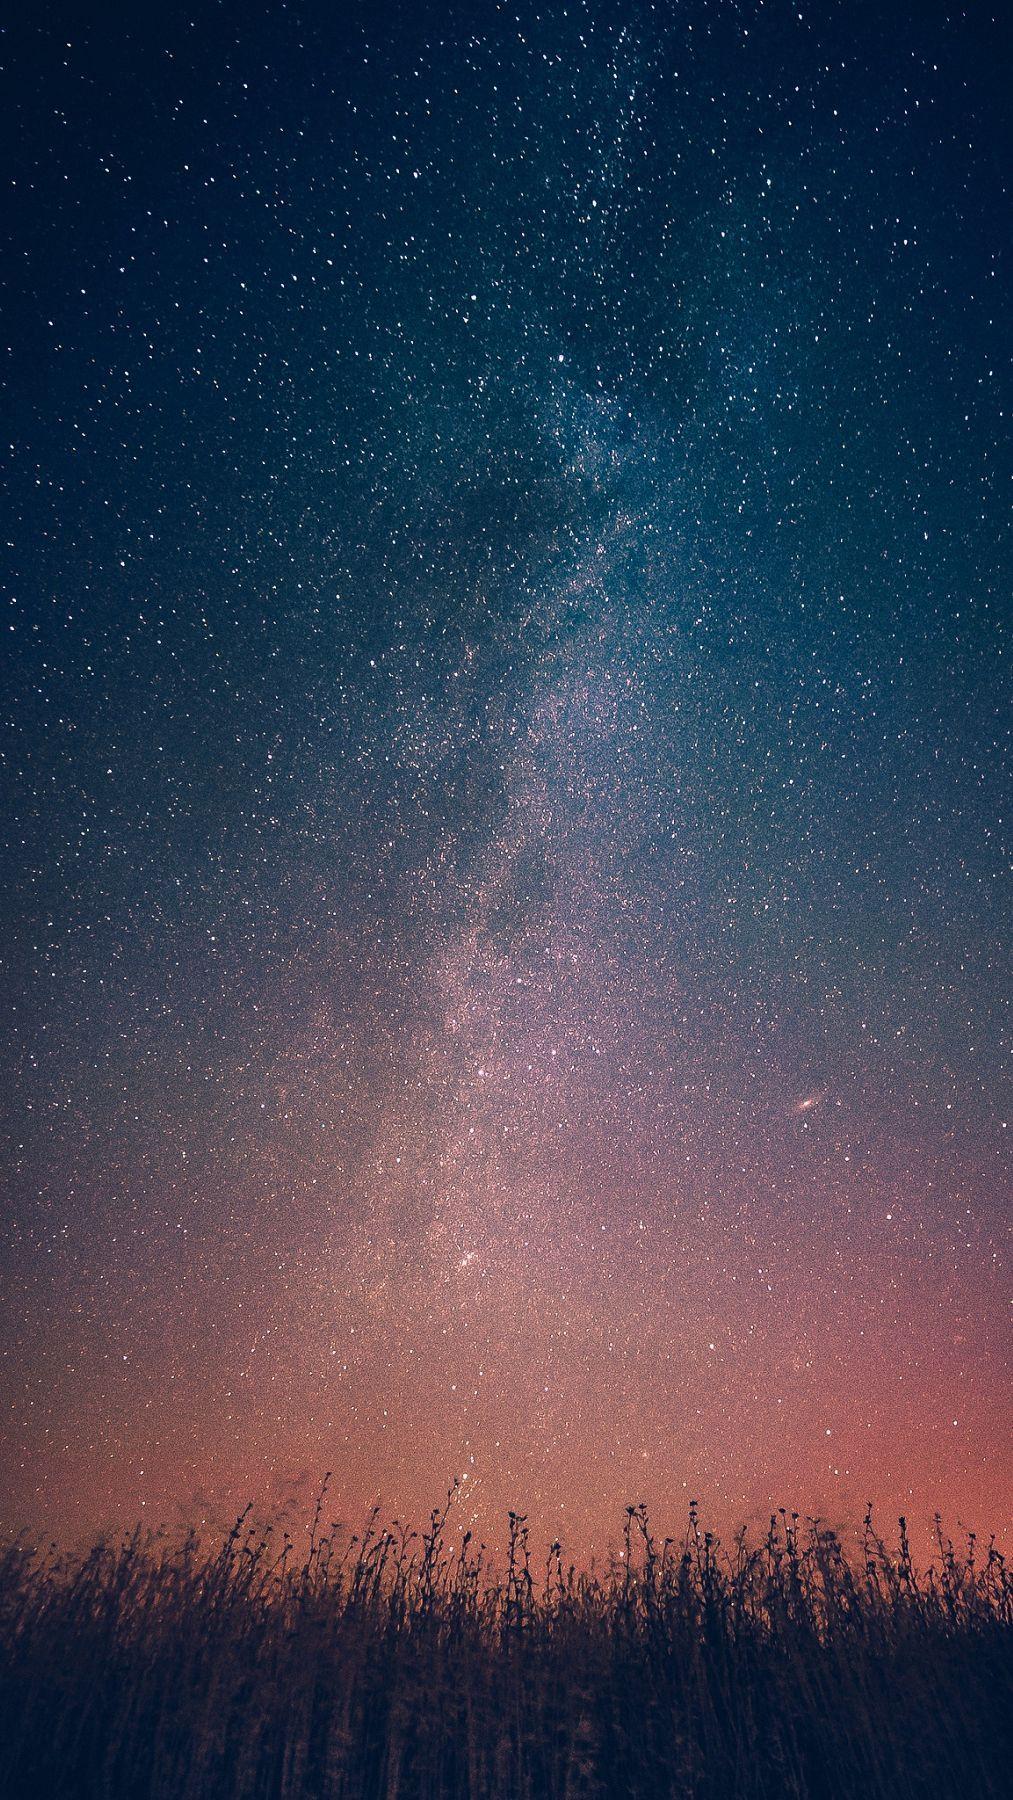 Milky Way Galaxy From Earth Infinite Stars IPhone Wallpaper. 휴대폰